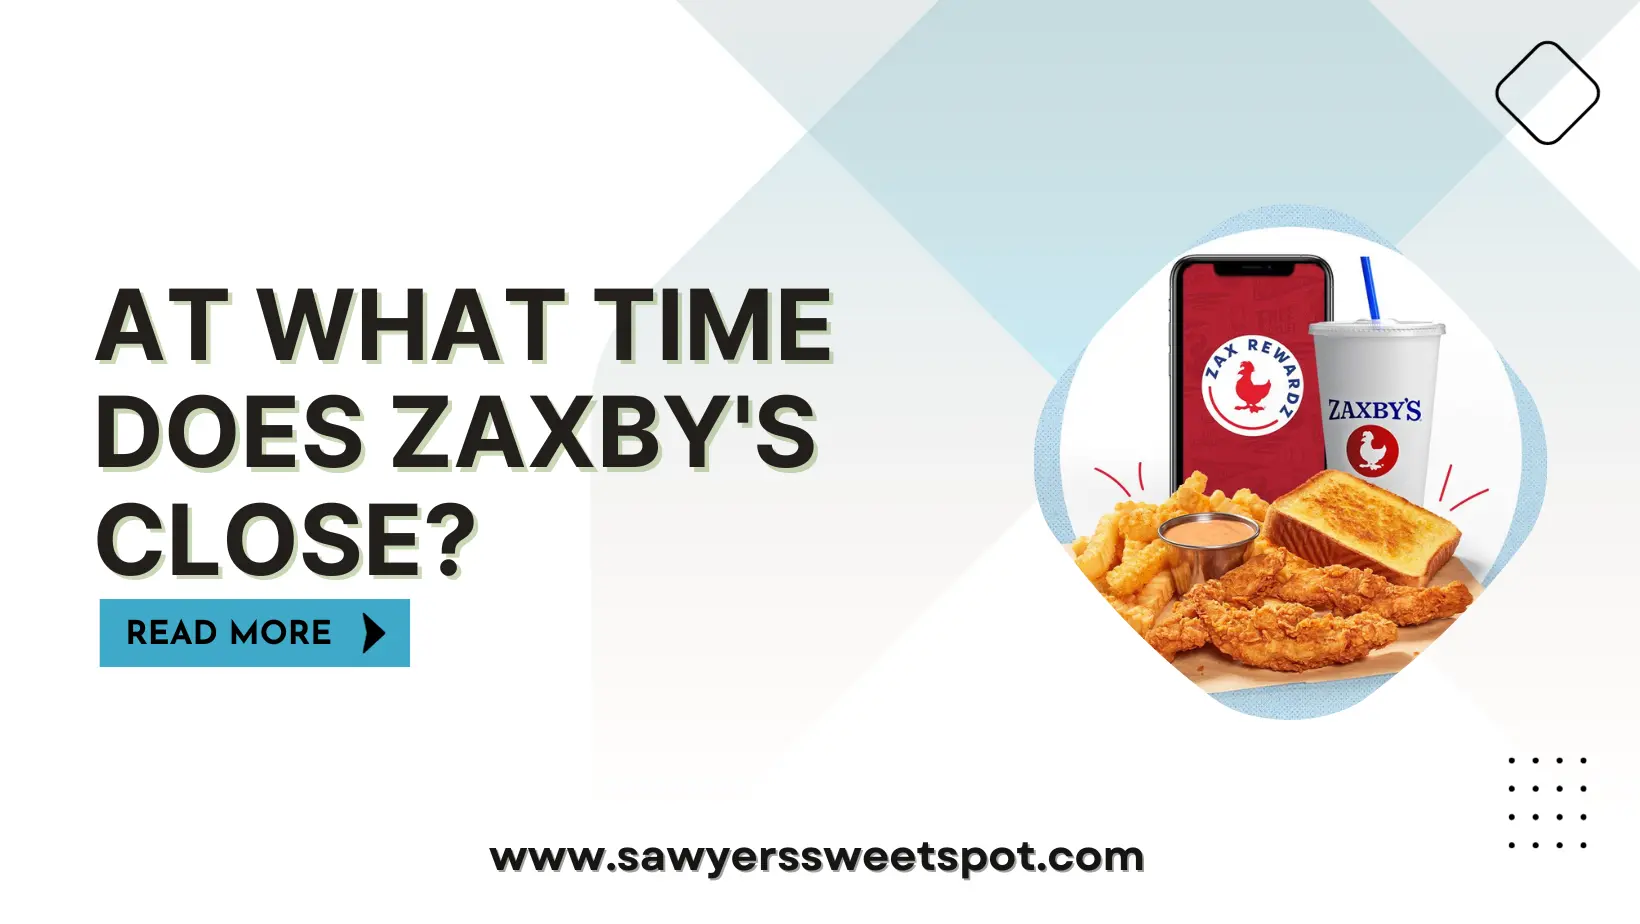 At What Time Does Zaxby's Close?